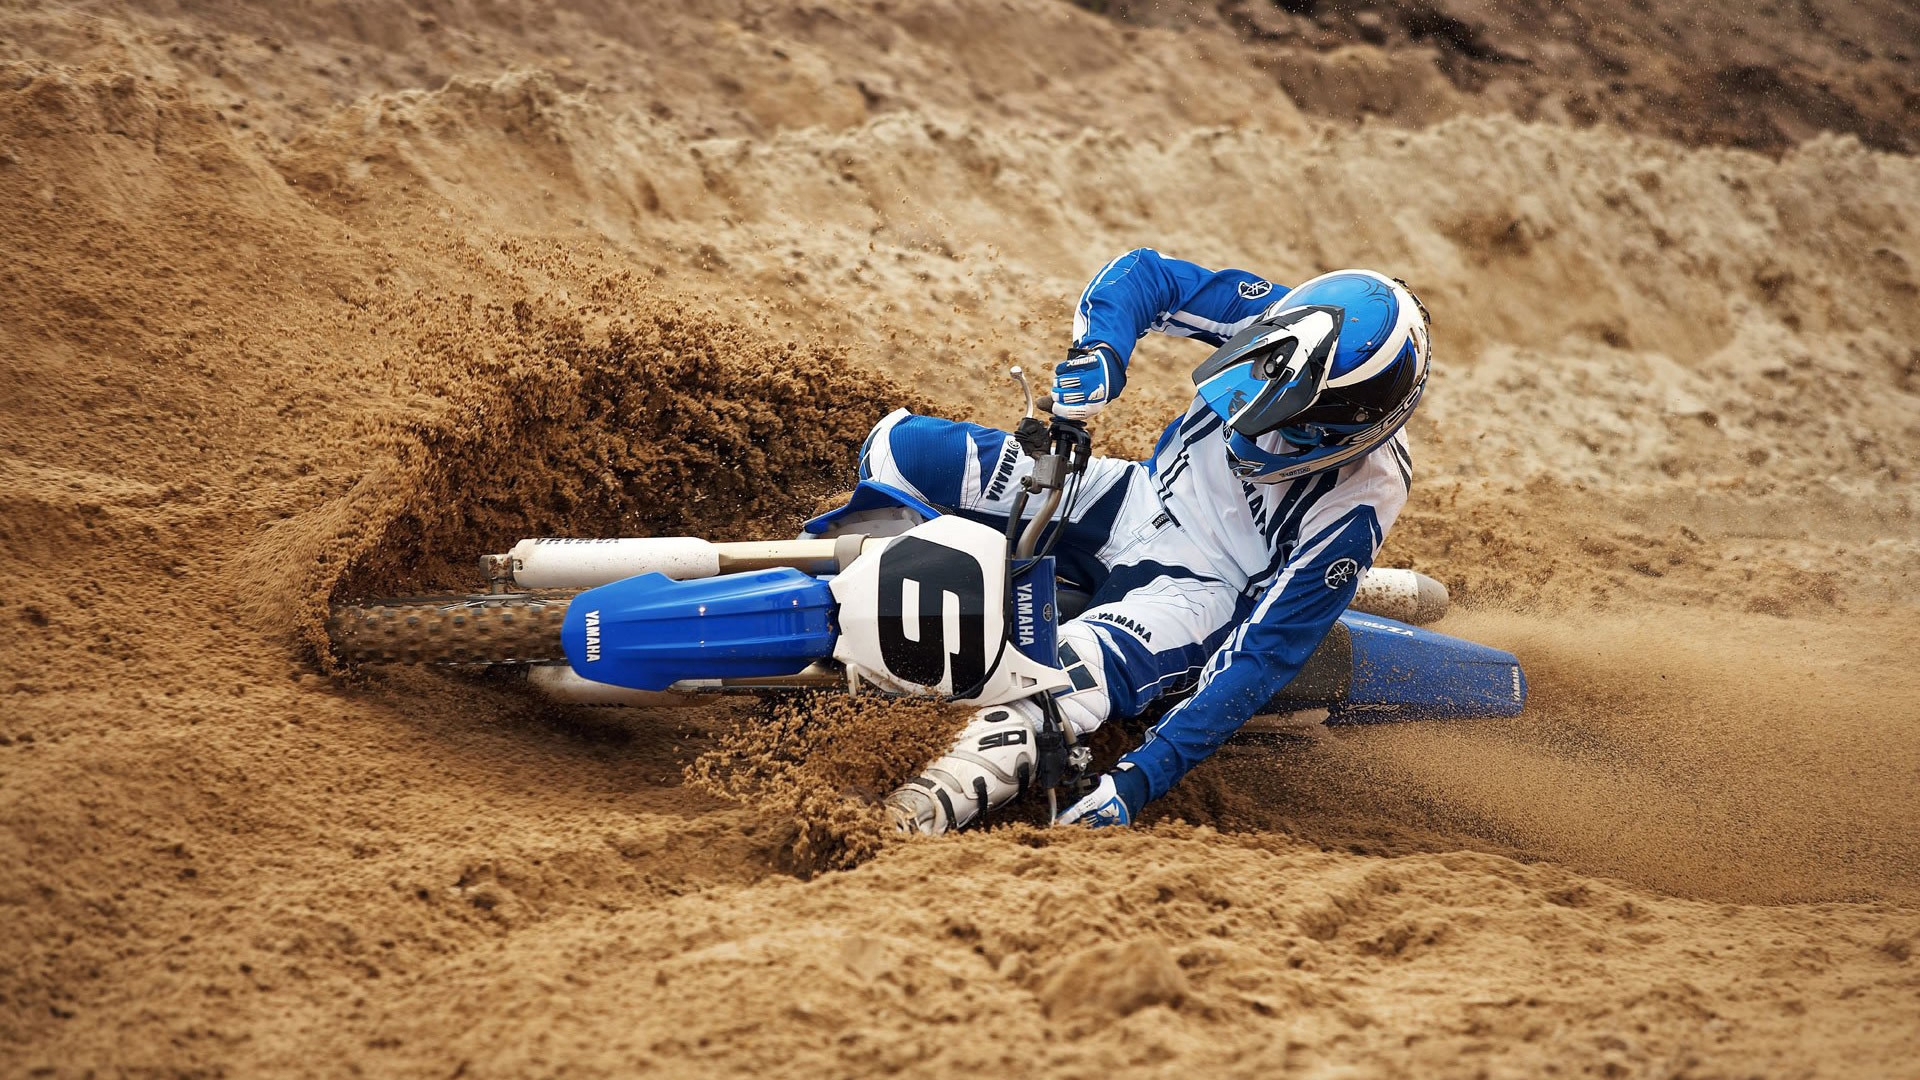 Extreme Moto Race for 1920 x 1080 HDTV 1080p resolution